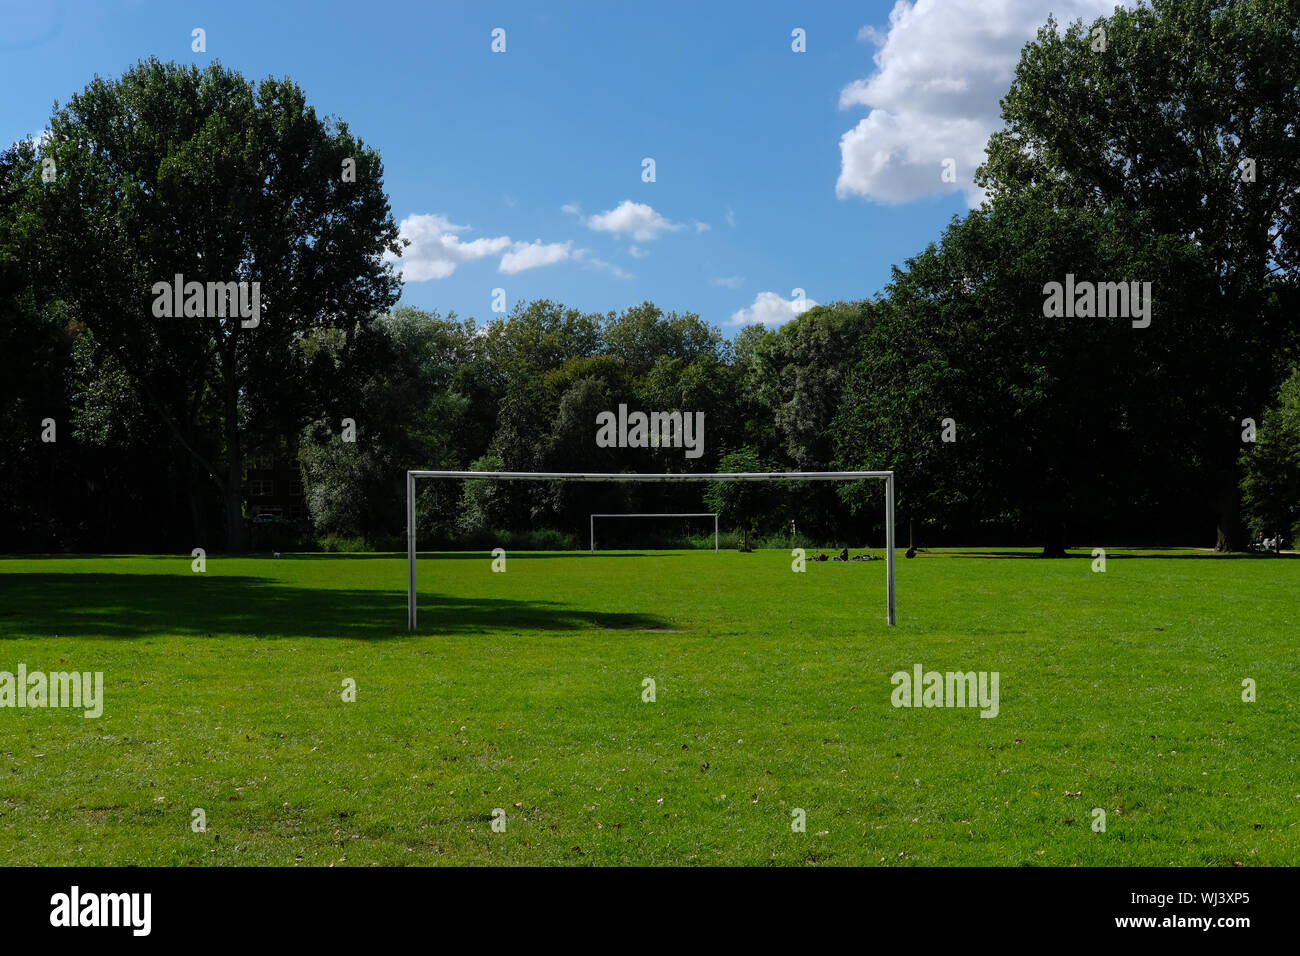 Two football or soccer goalposts in parallel in a park with green grass and blue skies and people sitting in the grass Stock Photo